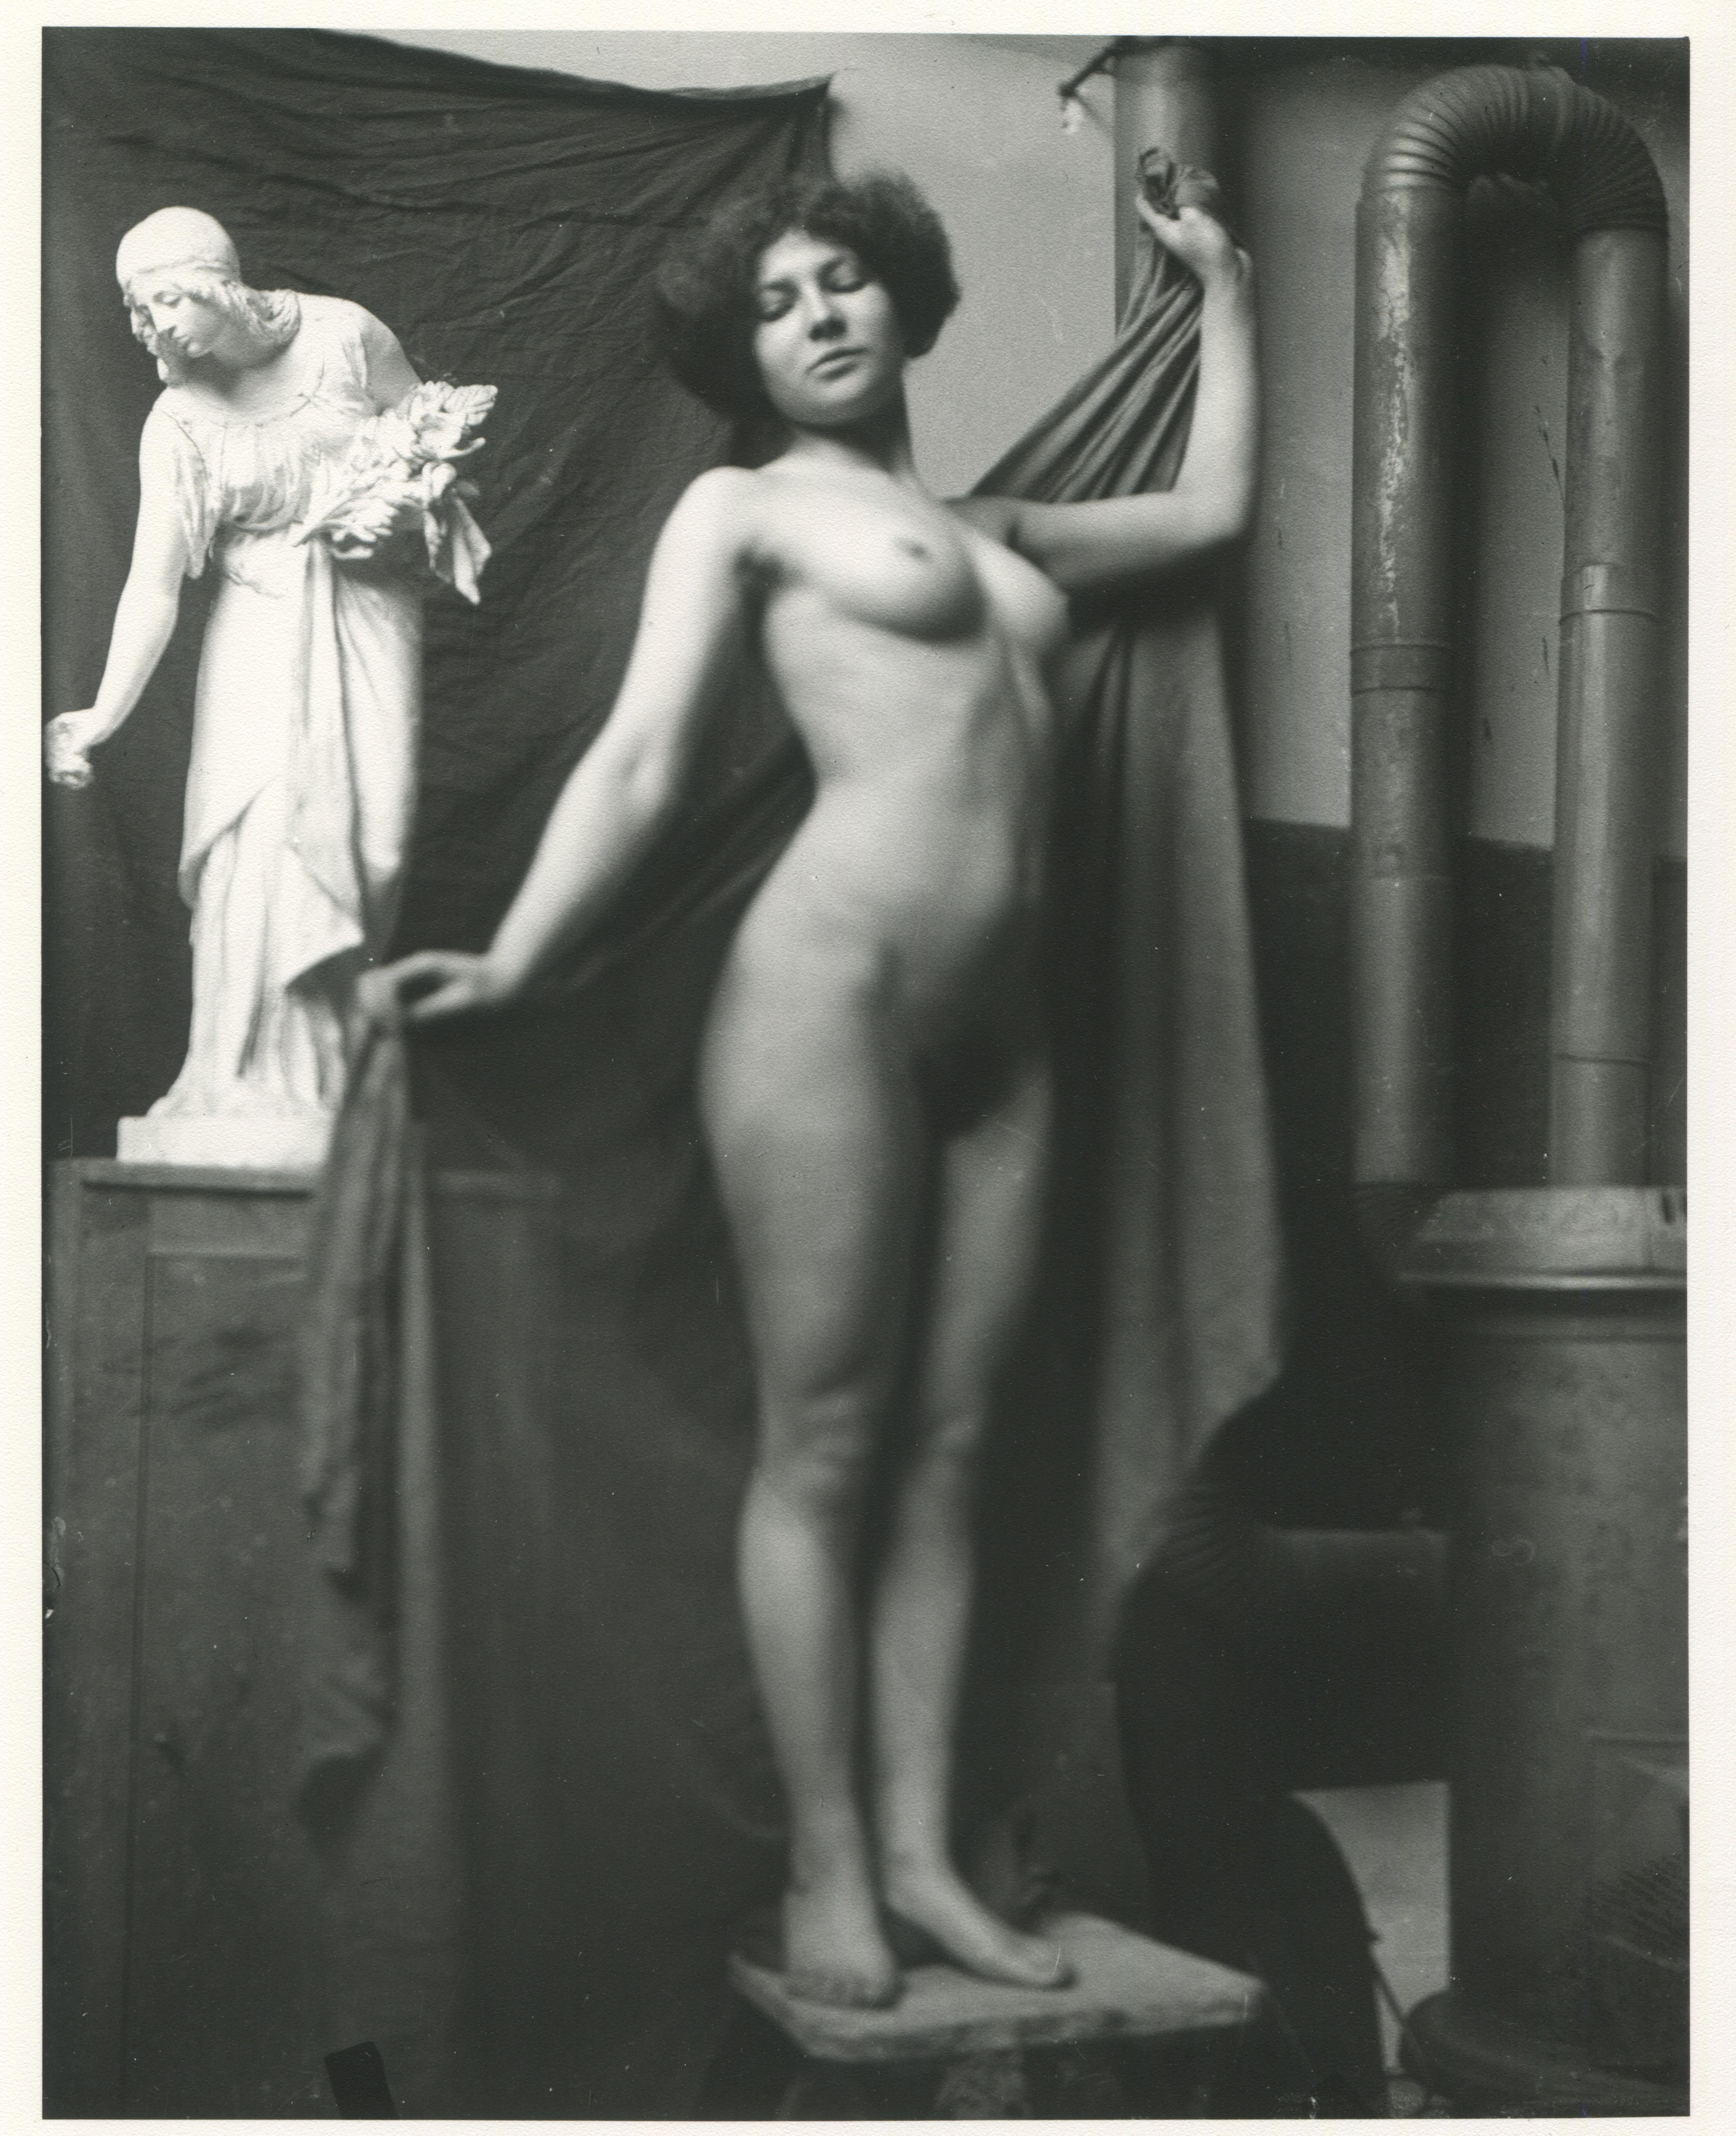  Heinrich Zille Black and White Photograph - Nude Studies - Edition griffelkunst